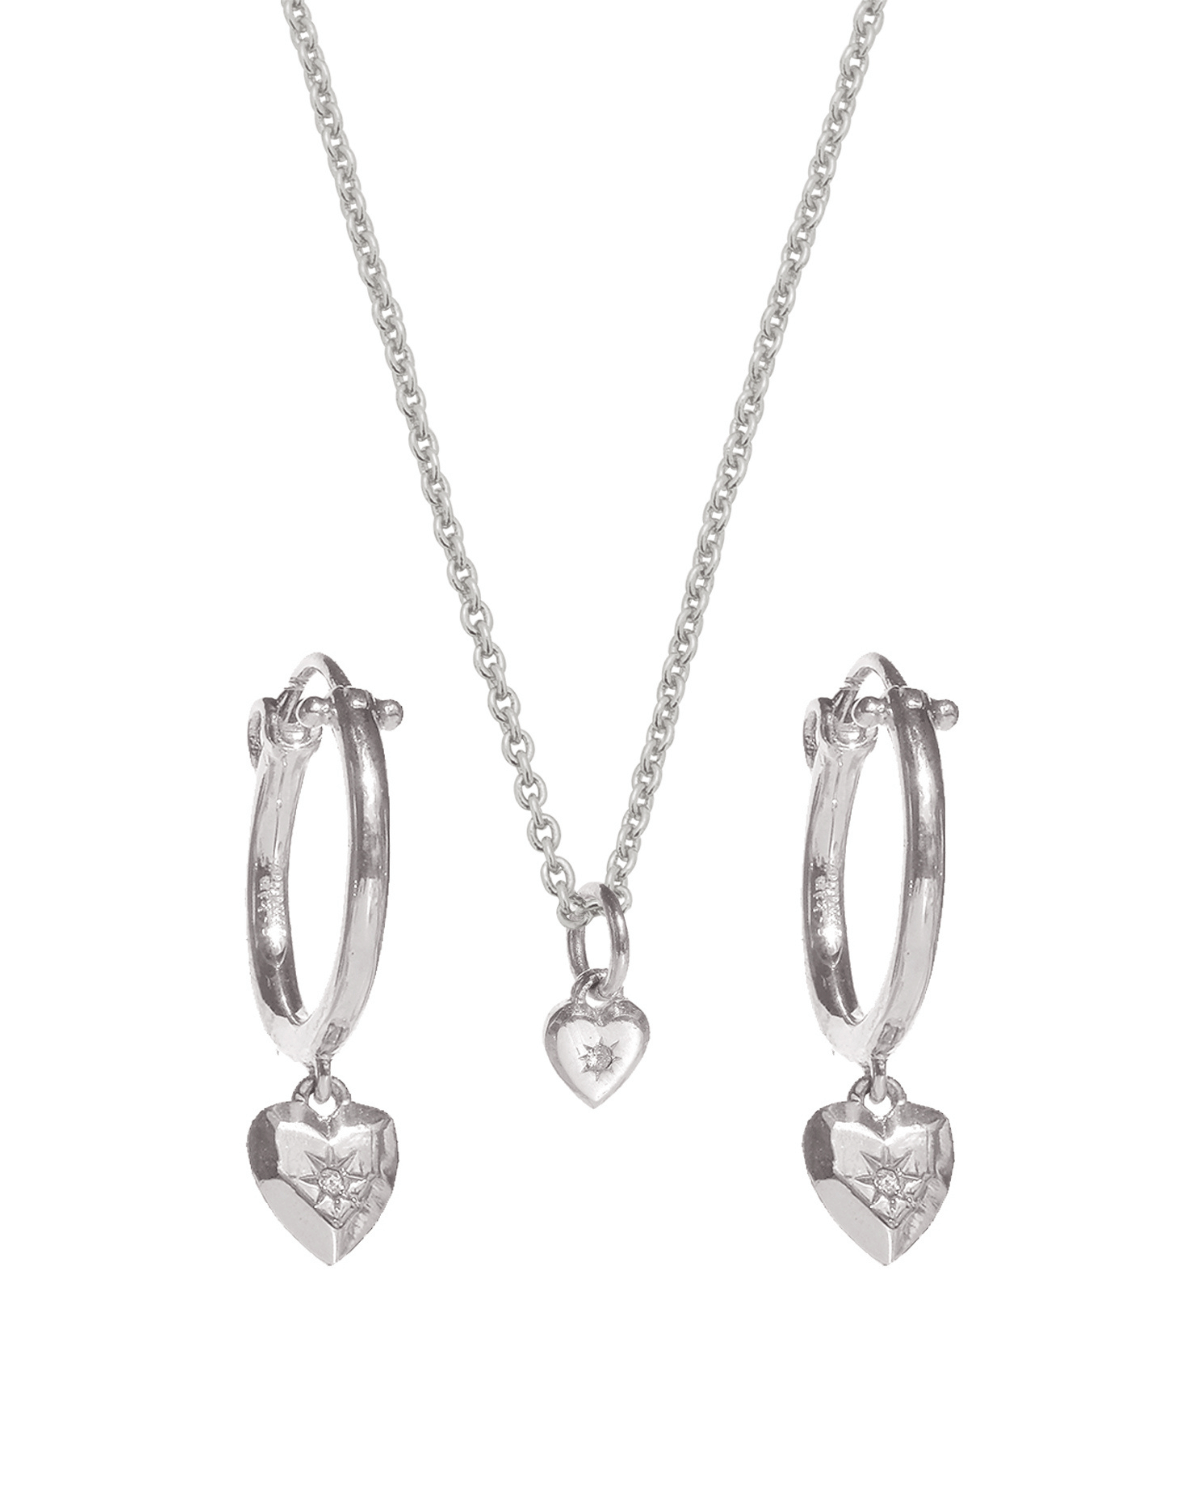 The Heart Gift Set - Sterling Silver